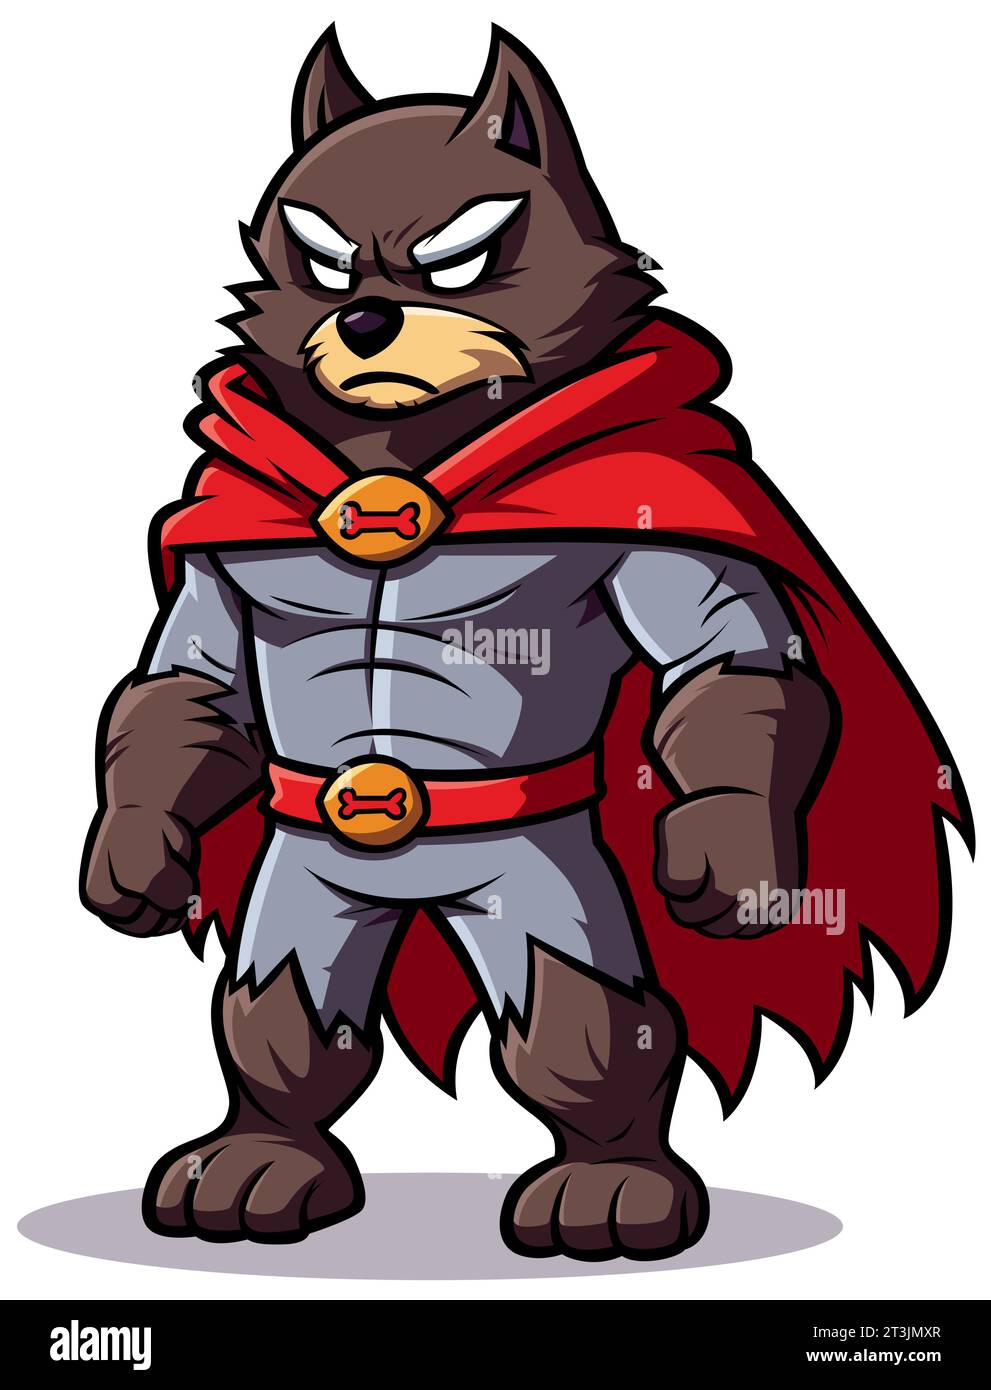 Cartoon style illustration of fierce superhero wolf with red cape, standing with assertive posture, isolated on white background. Stock Vector